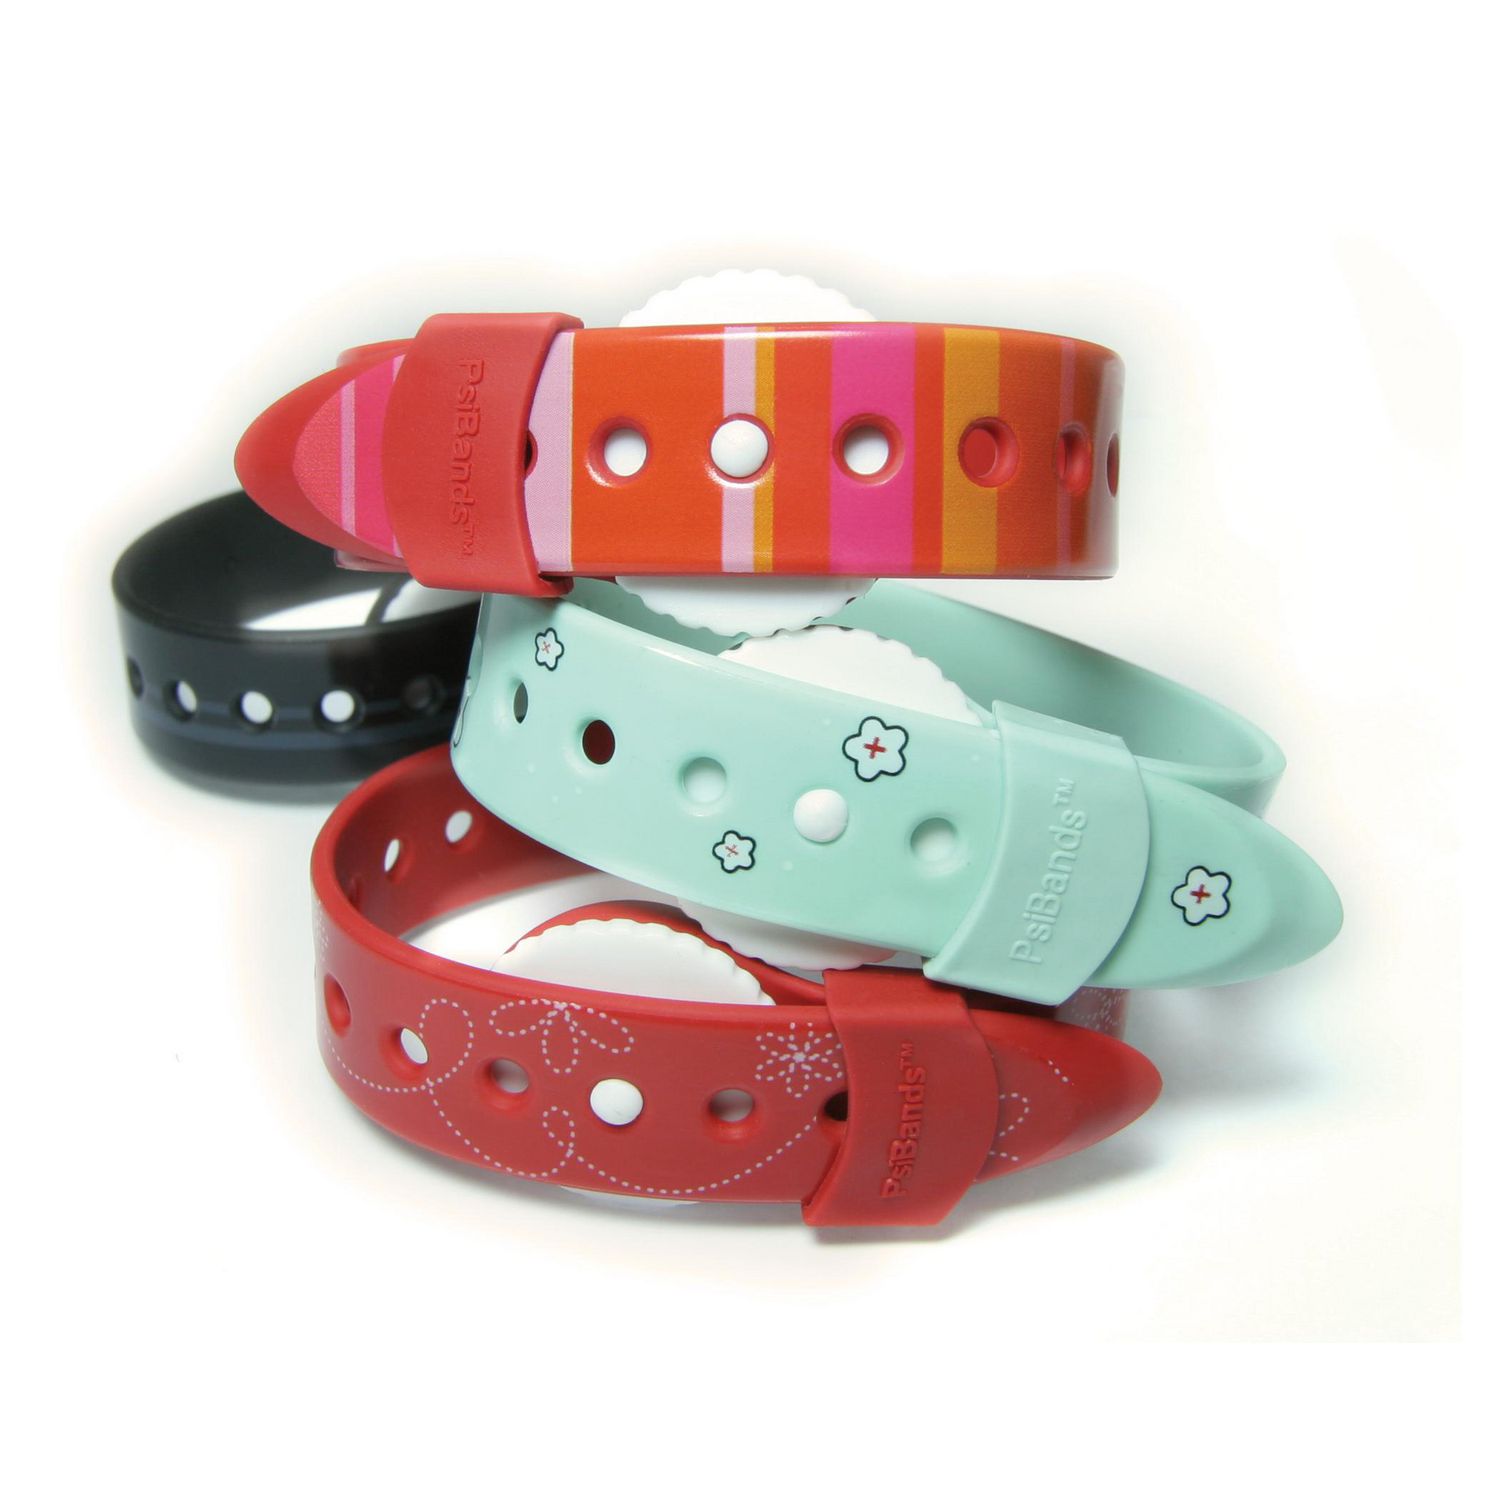 psi bands wristbands motion sickness bands